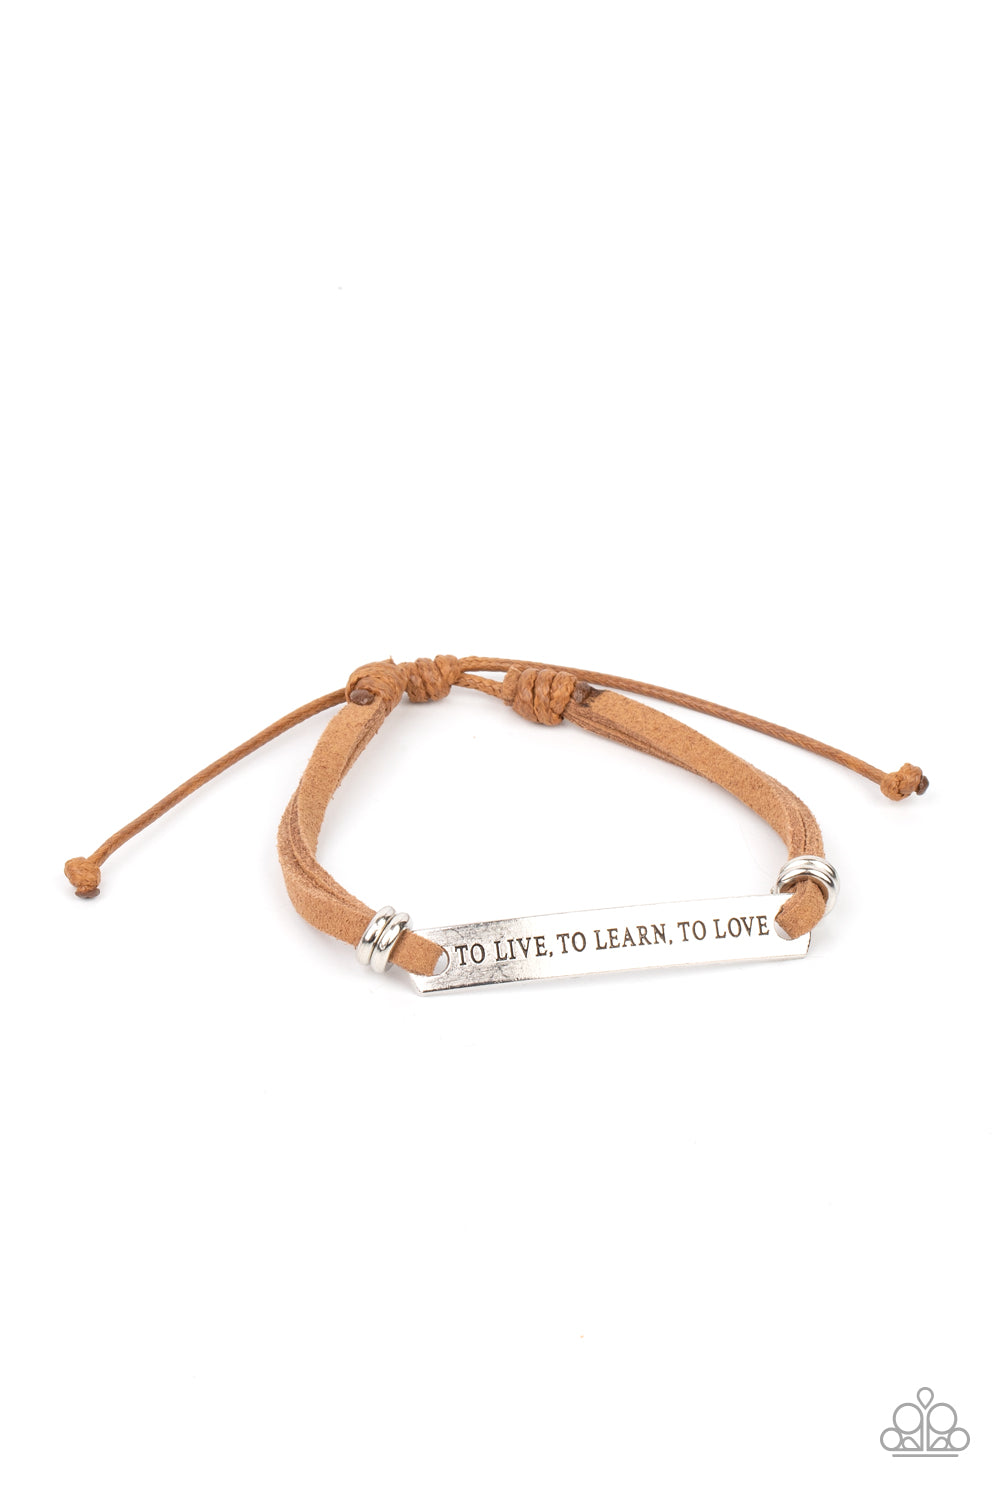 To Live, To Learn, To Love Bracelet (Blue, Brown, Black)